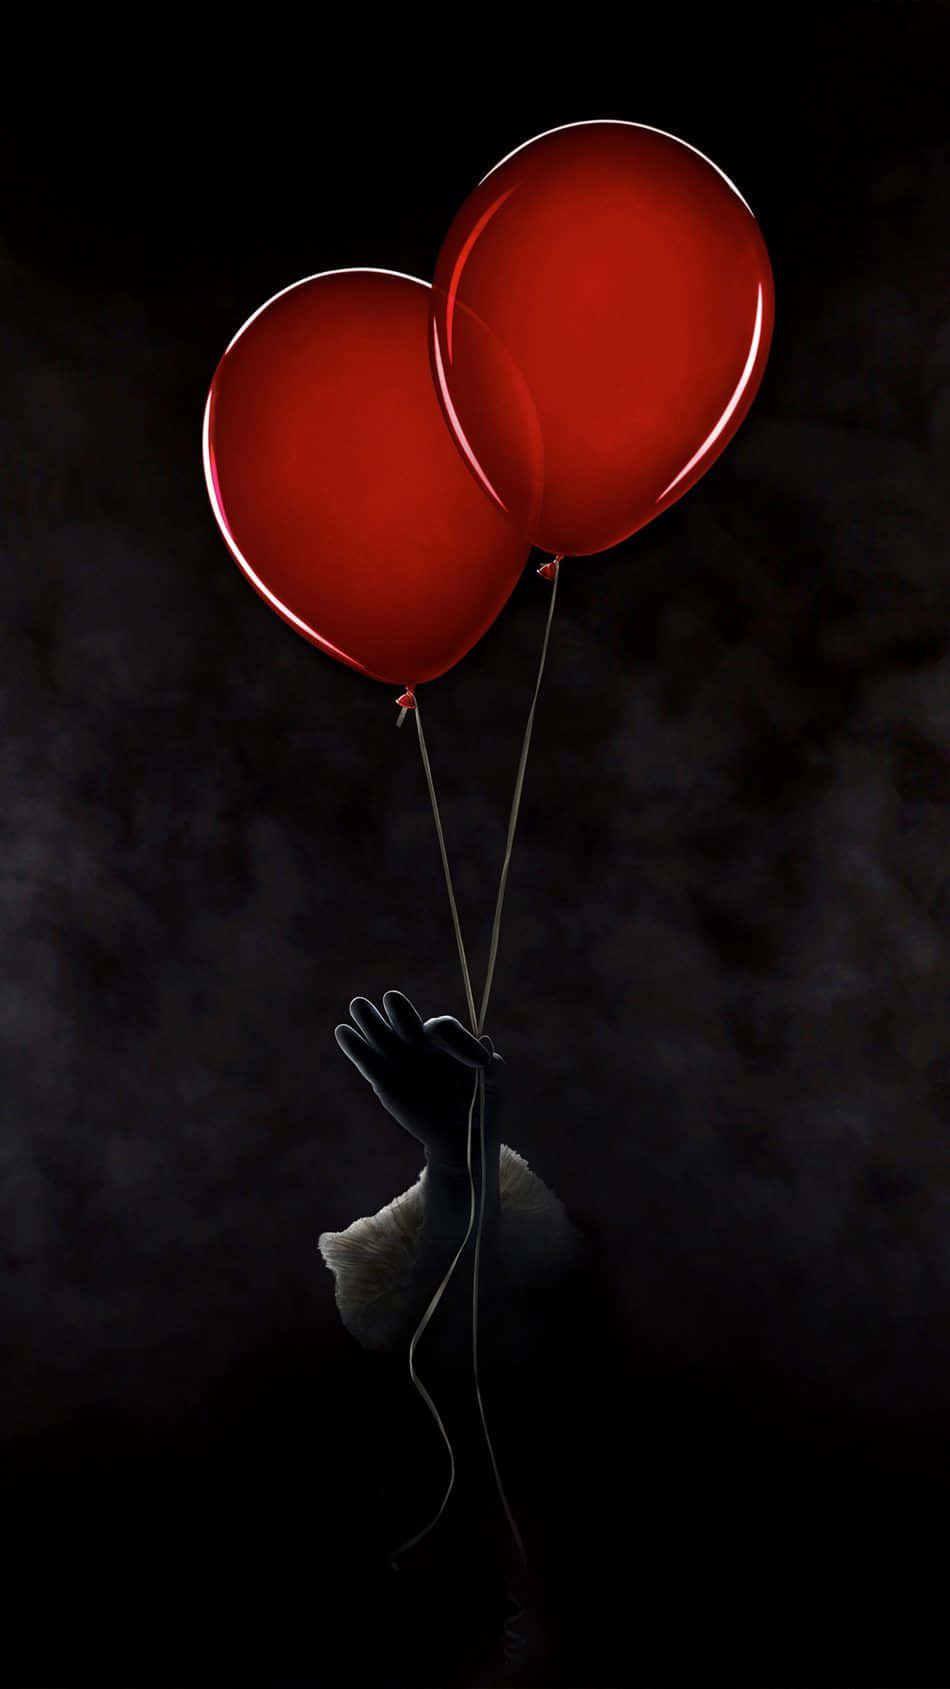 Bill Skarsgard as Pennywise the Clown in "IT" Wallpaper